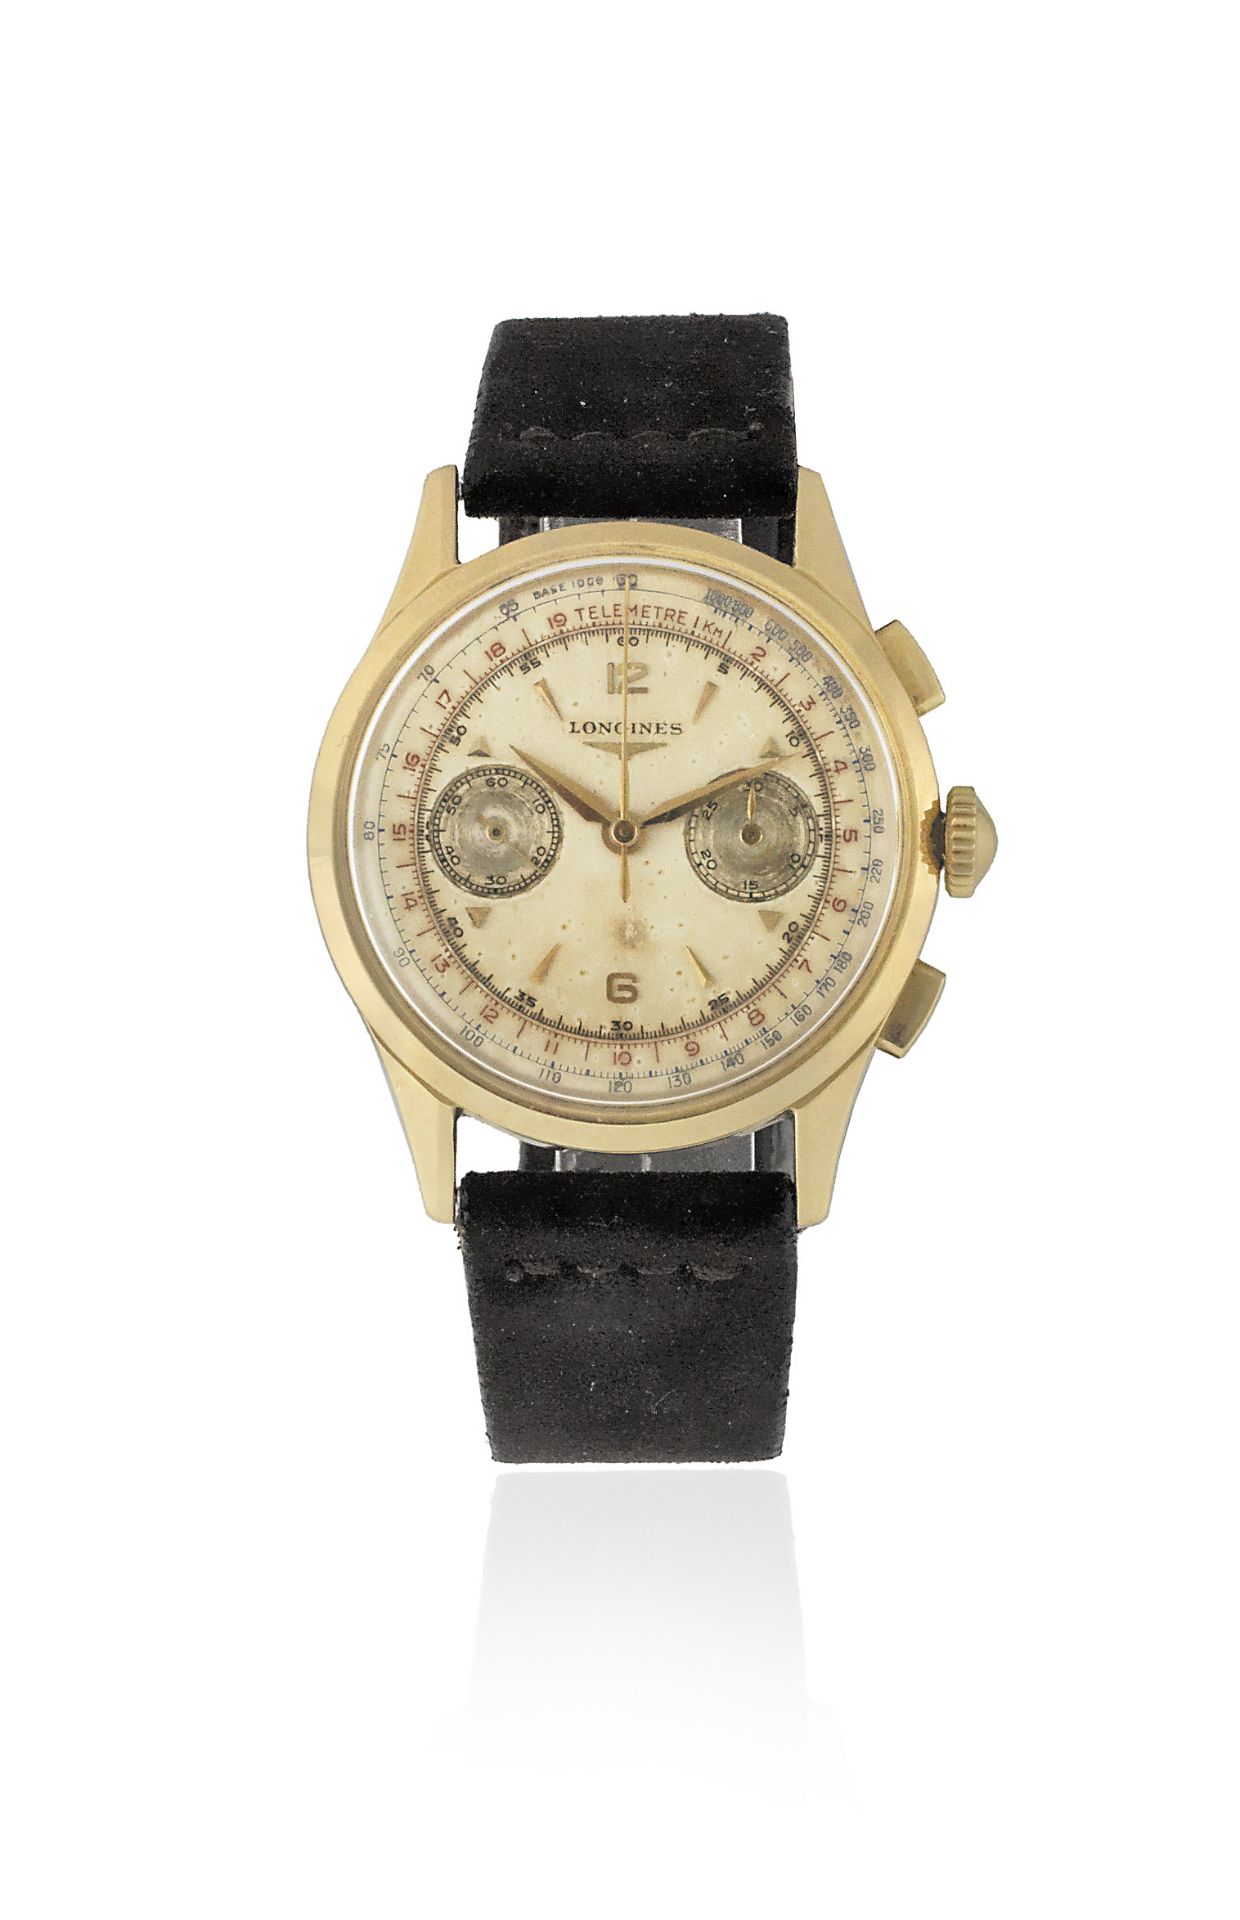 Longines. An 18K gold manual wind flyback chronograph wristwatch Ref: 5967, 1952